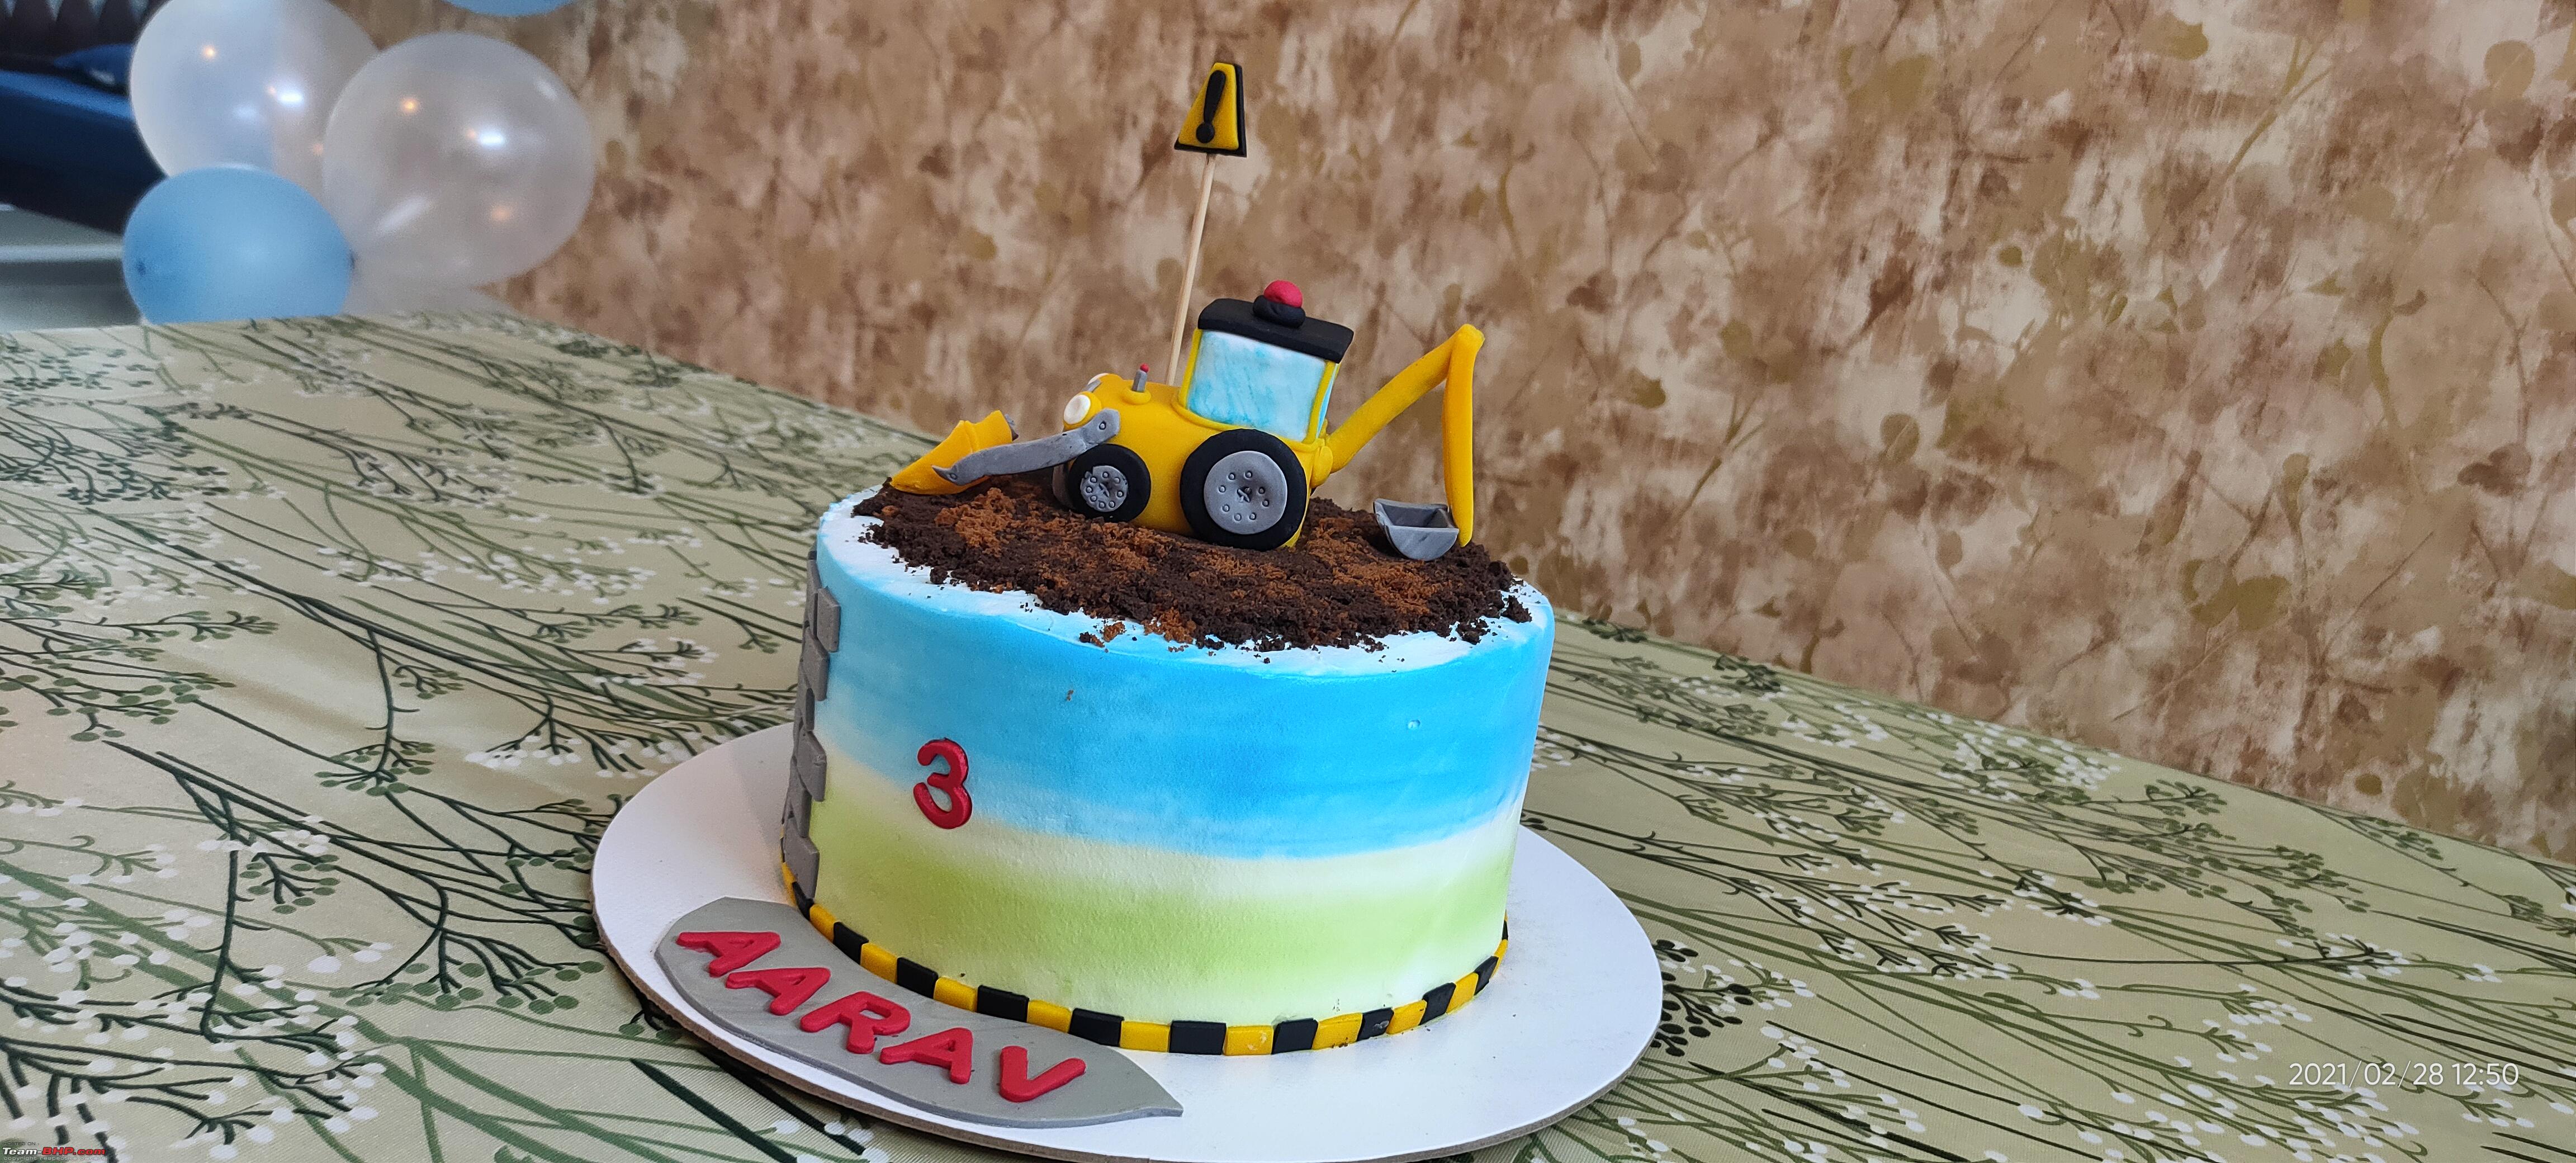 tousled day: Digger cake